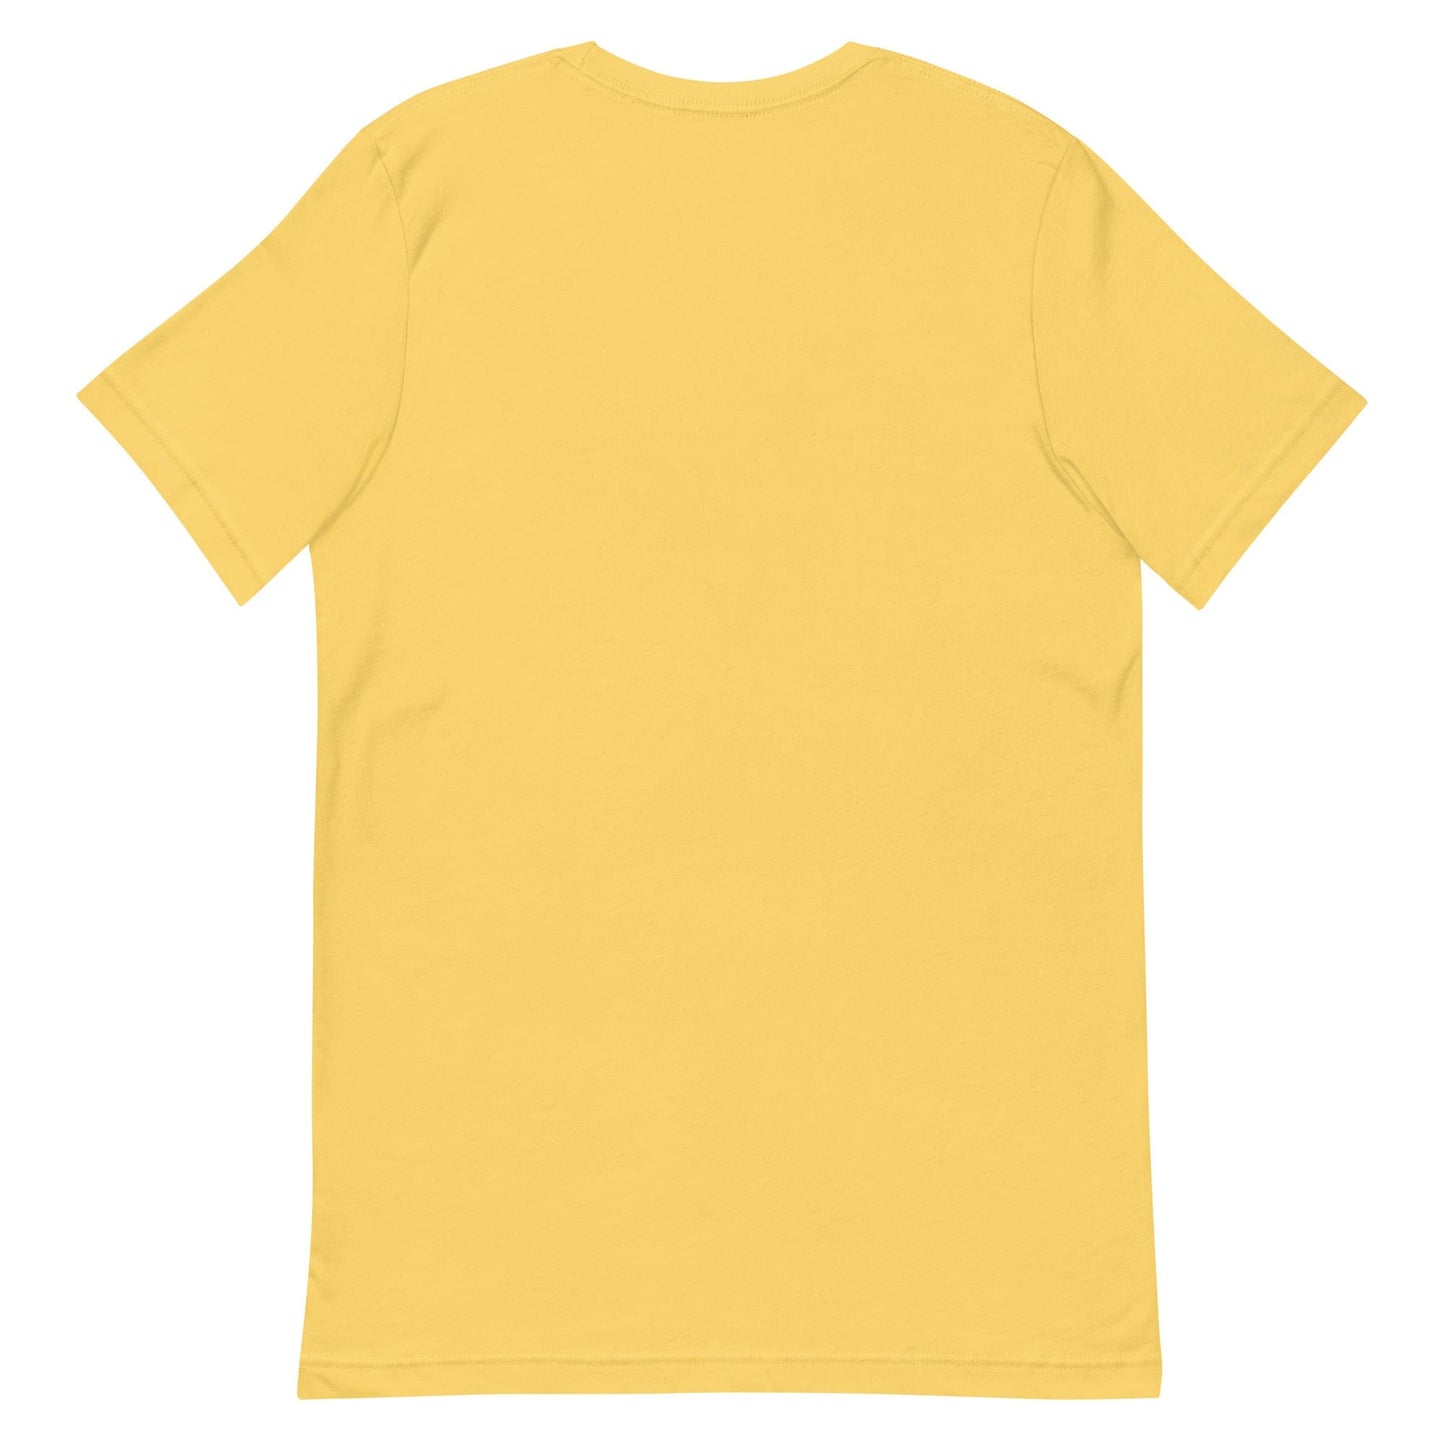 stay-strong-feminist-tshirt-yellow-apparel-at-feminist-define-back